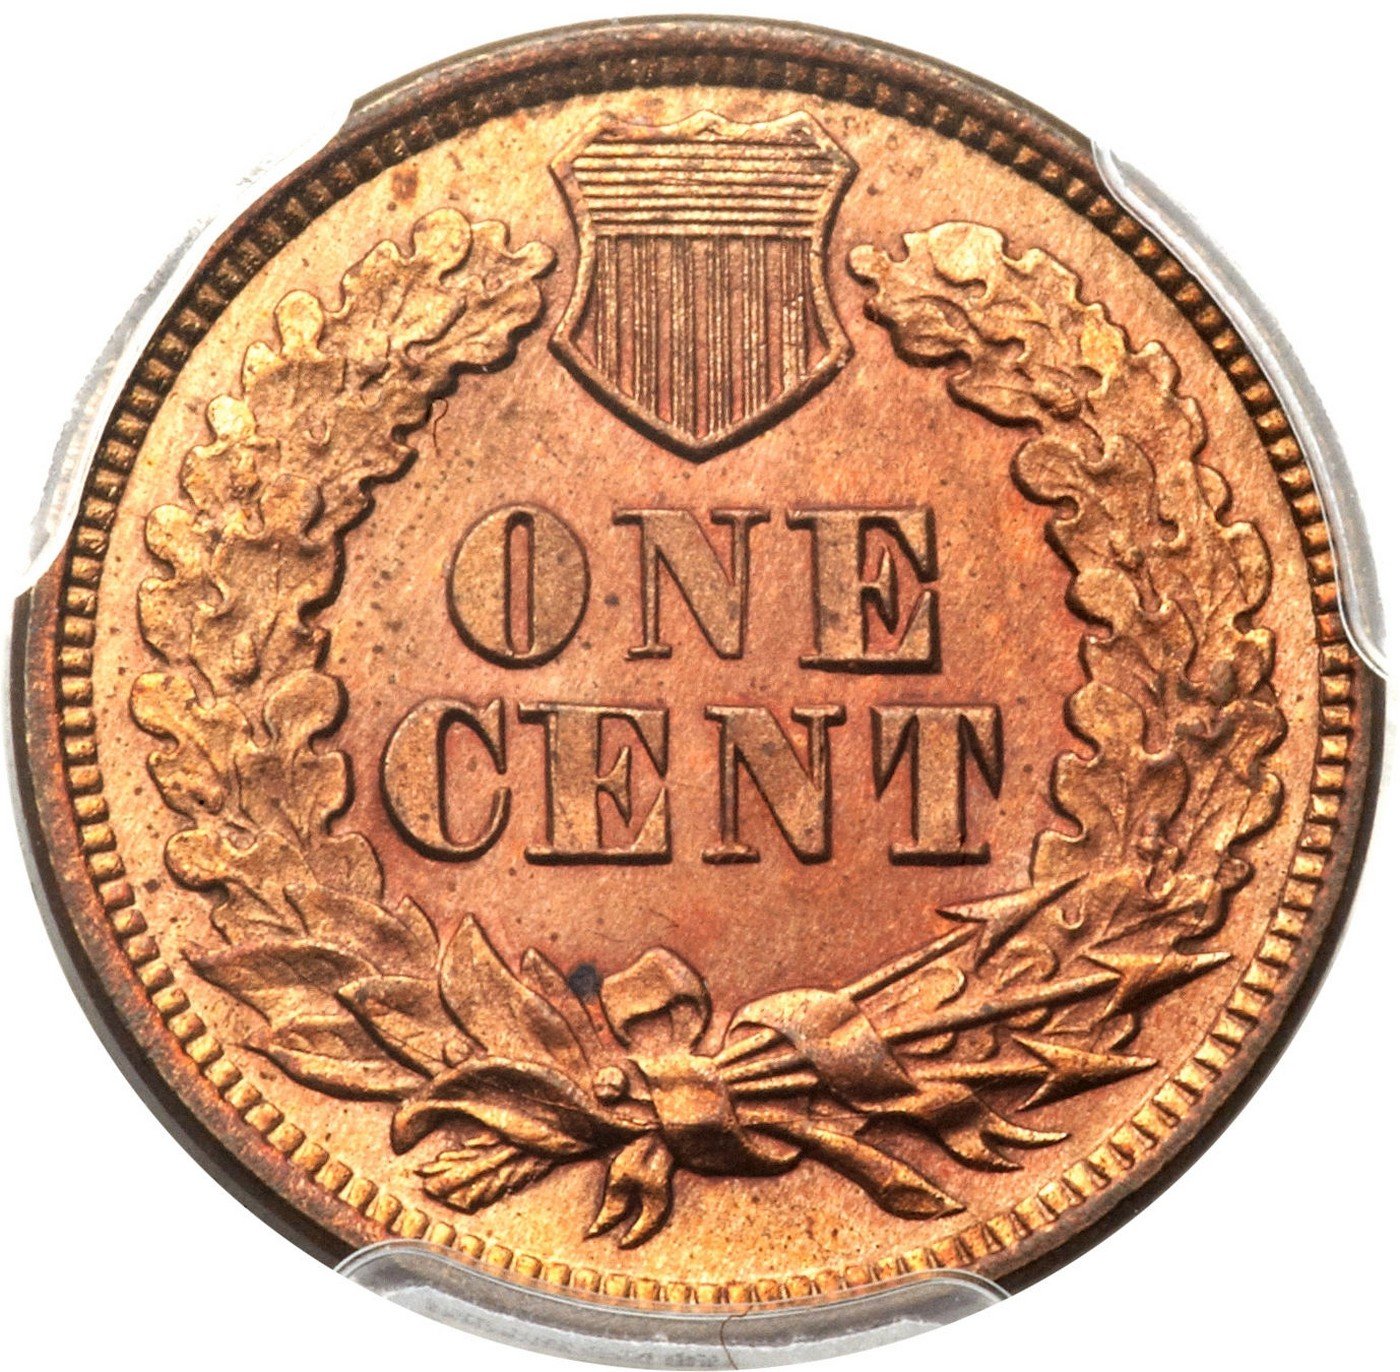 1870 DDR-013 Indian Head Penny - Photos courtesy of Heritage Auctions